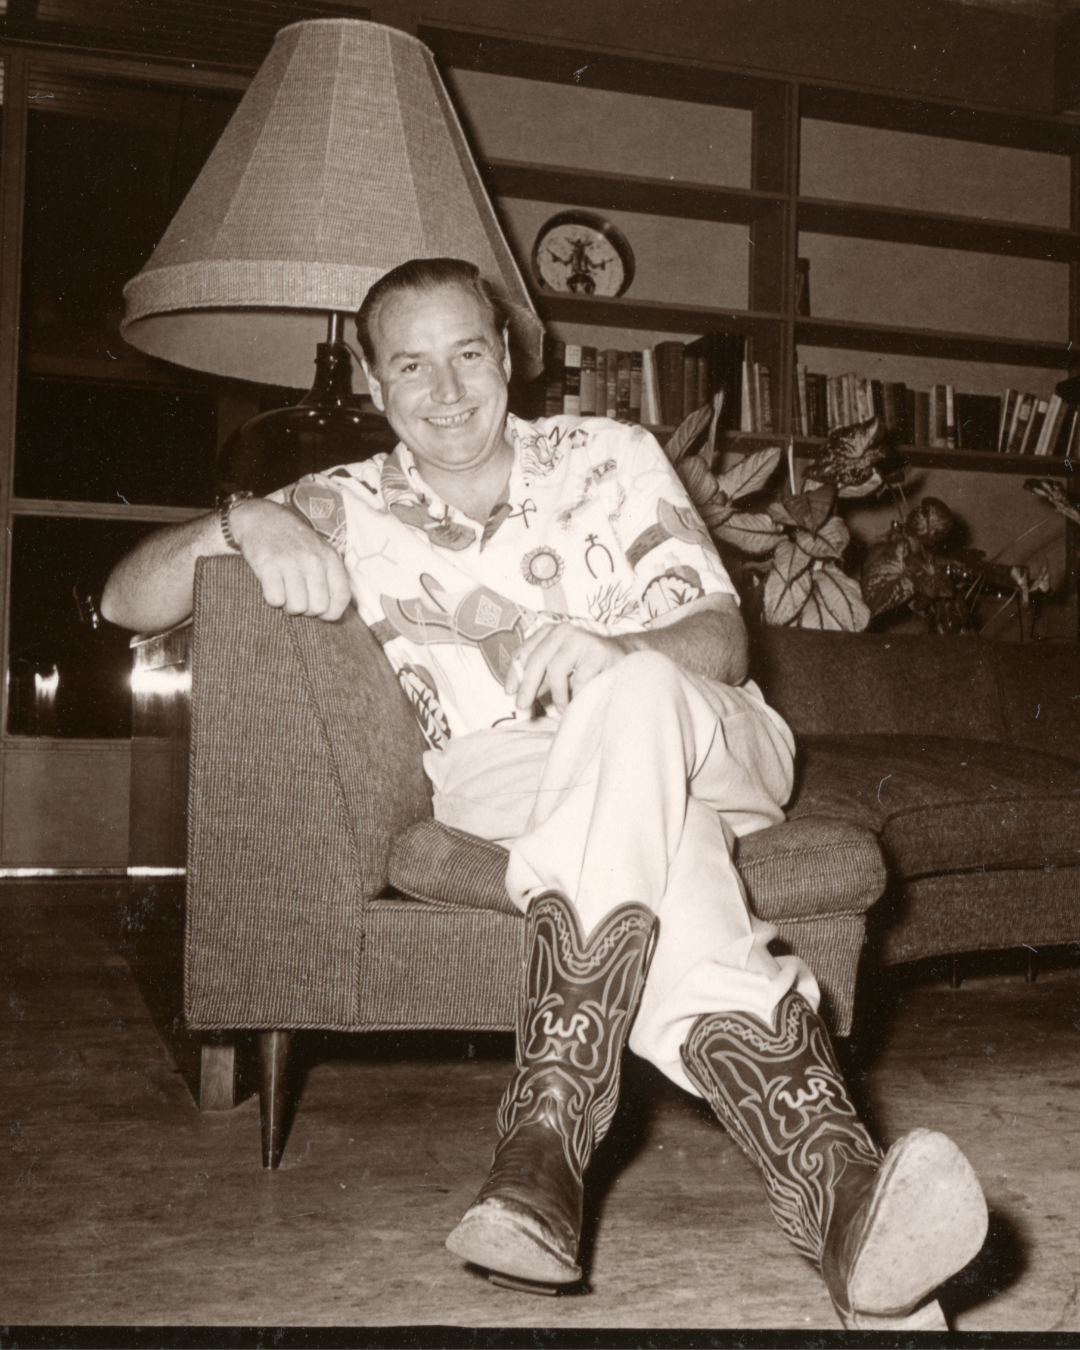 Winthrop Rockefeller sitting in on the couch in his home. He's smiling and his legs are crossed. His cowboy boots display his signature "WR" logo.